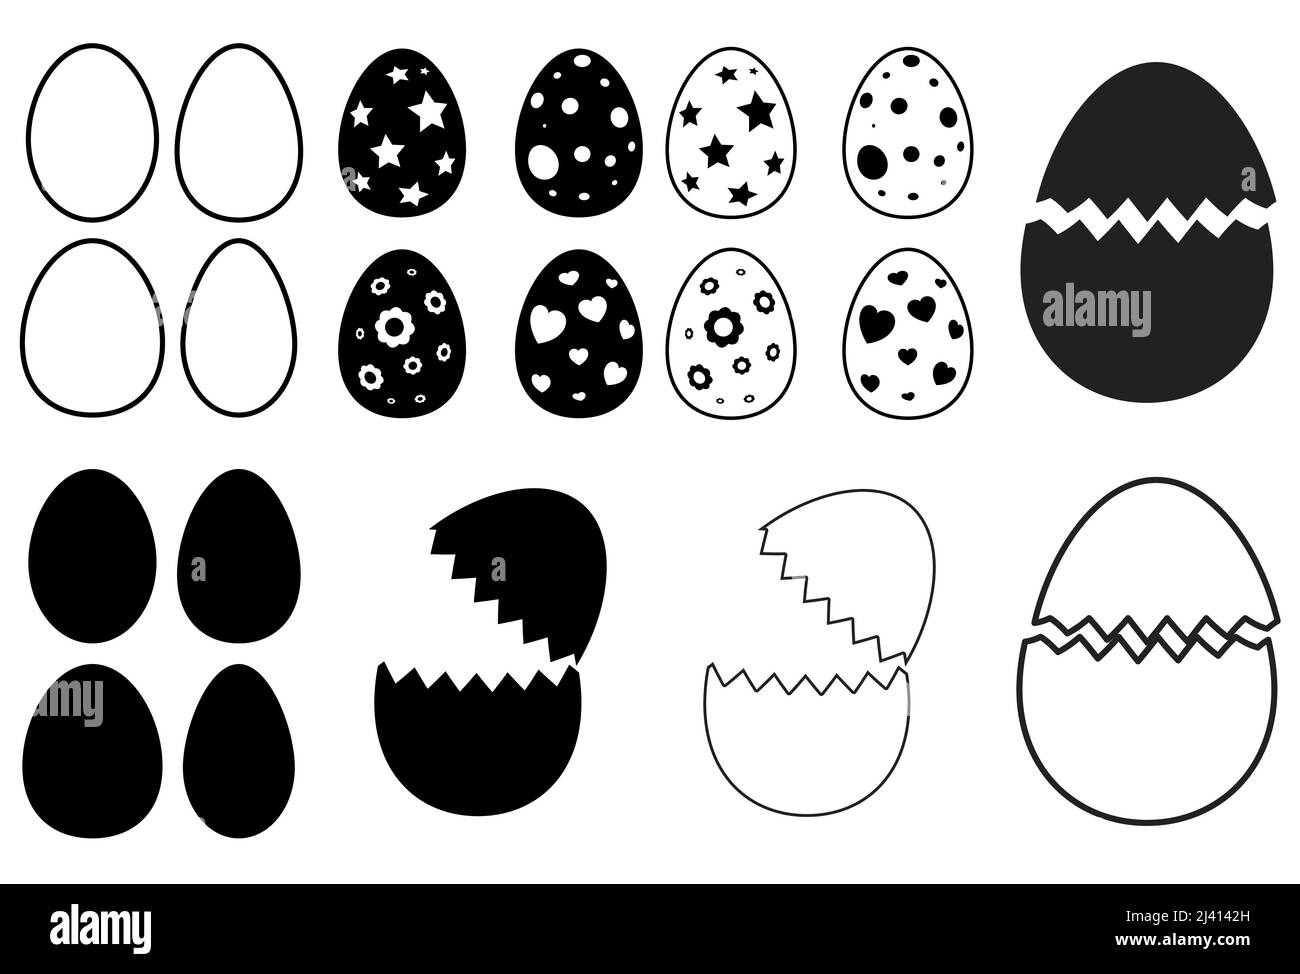 easter egg icon set. silhouette and outline design.Vector illustration isolated on white background. Stock Vector